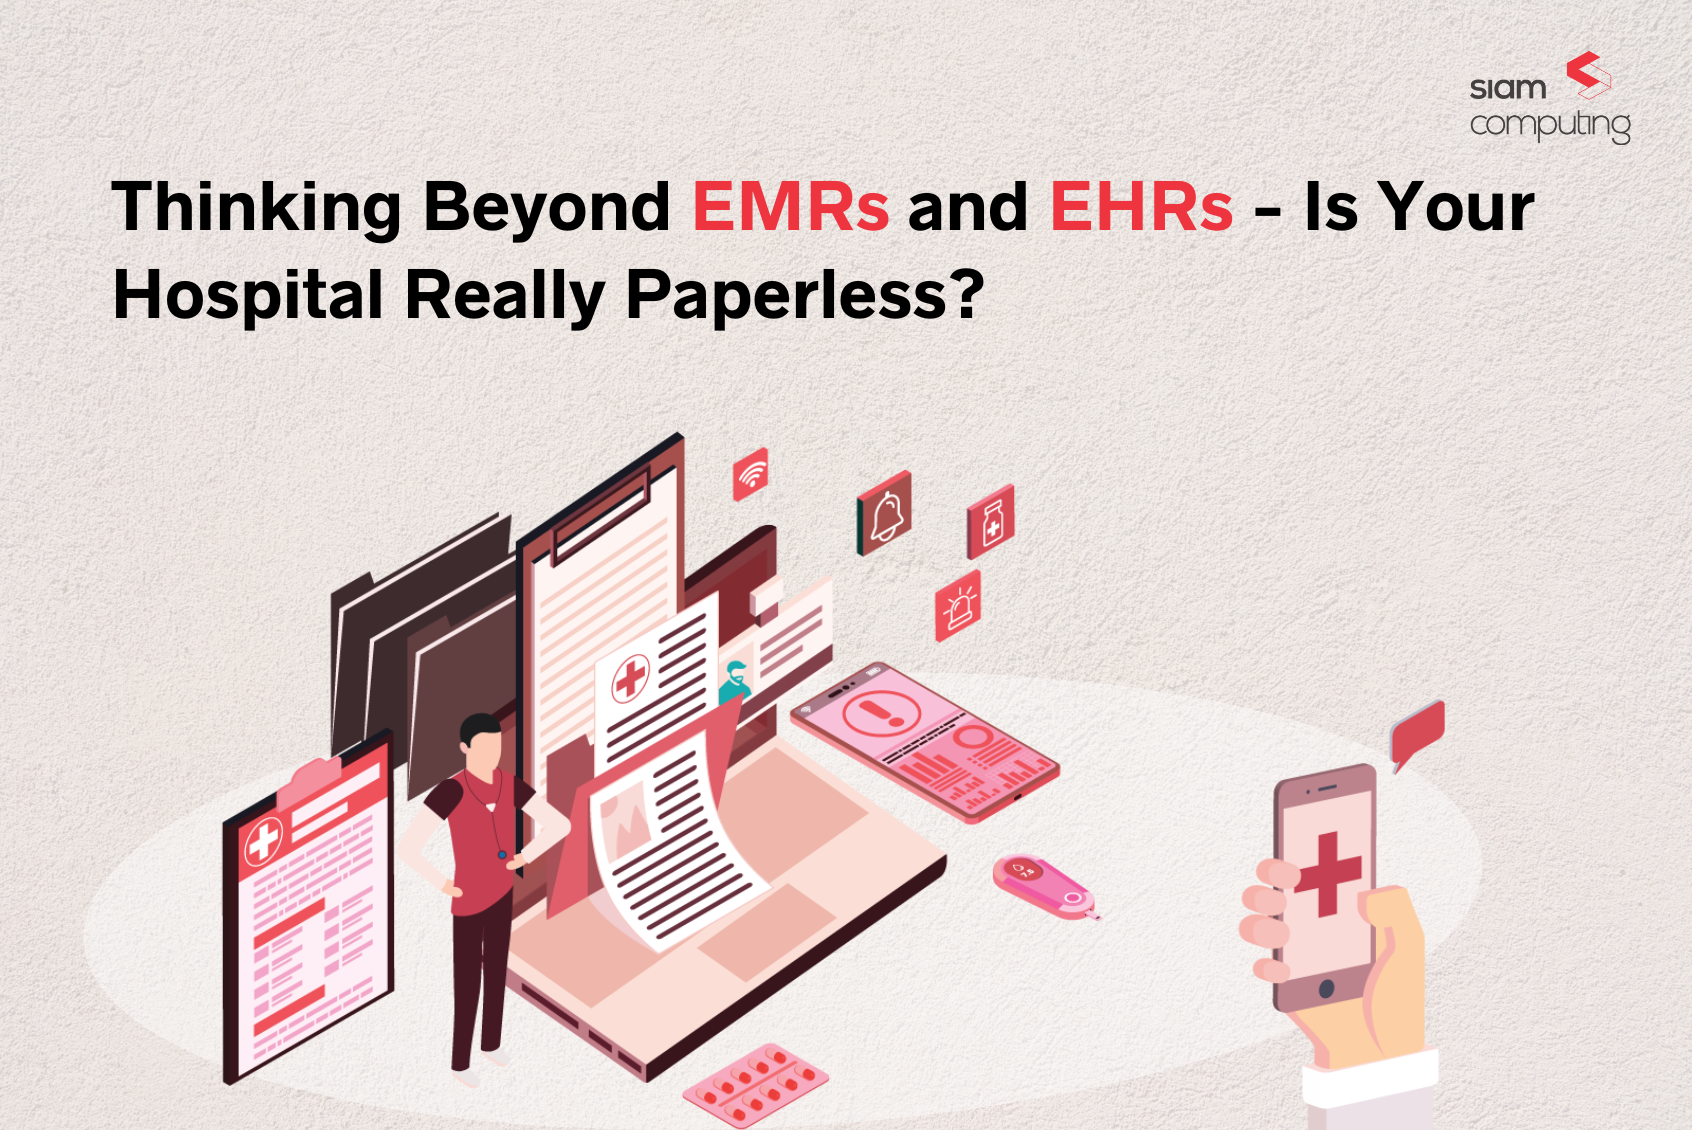 Thinking Beyond EMRs and EHRs - Is Your Hospital Really Paperless?